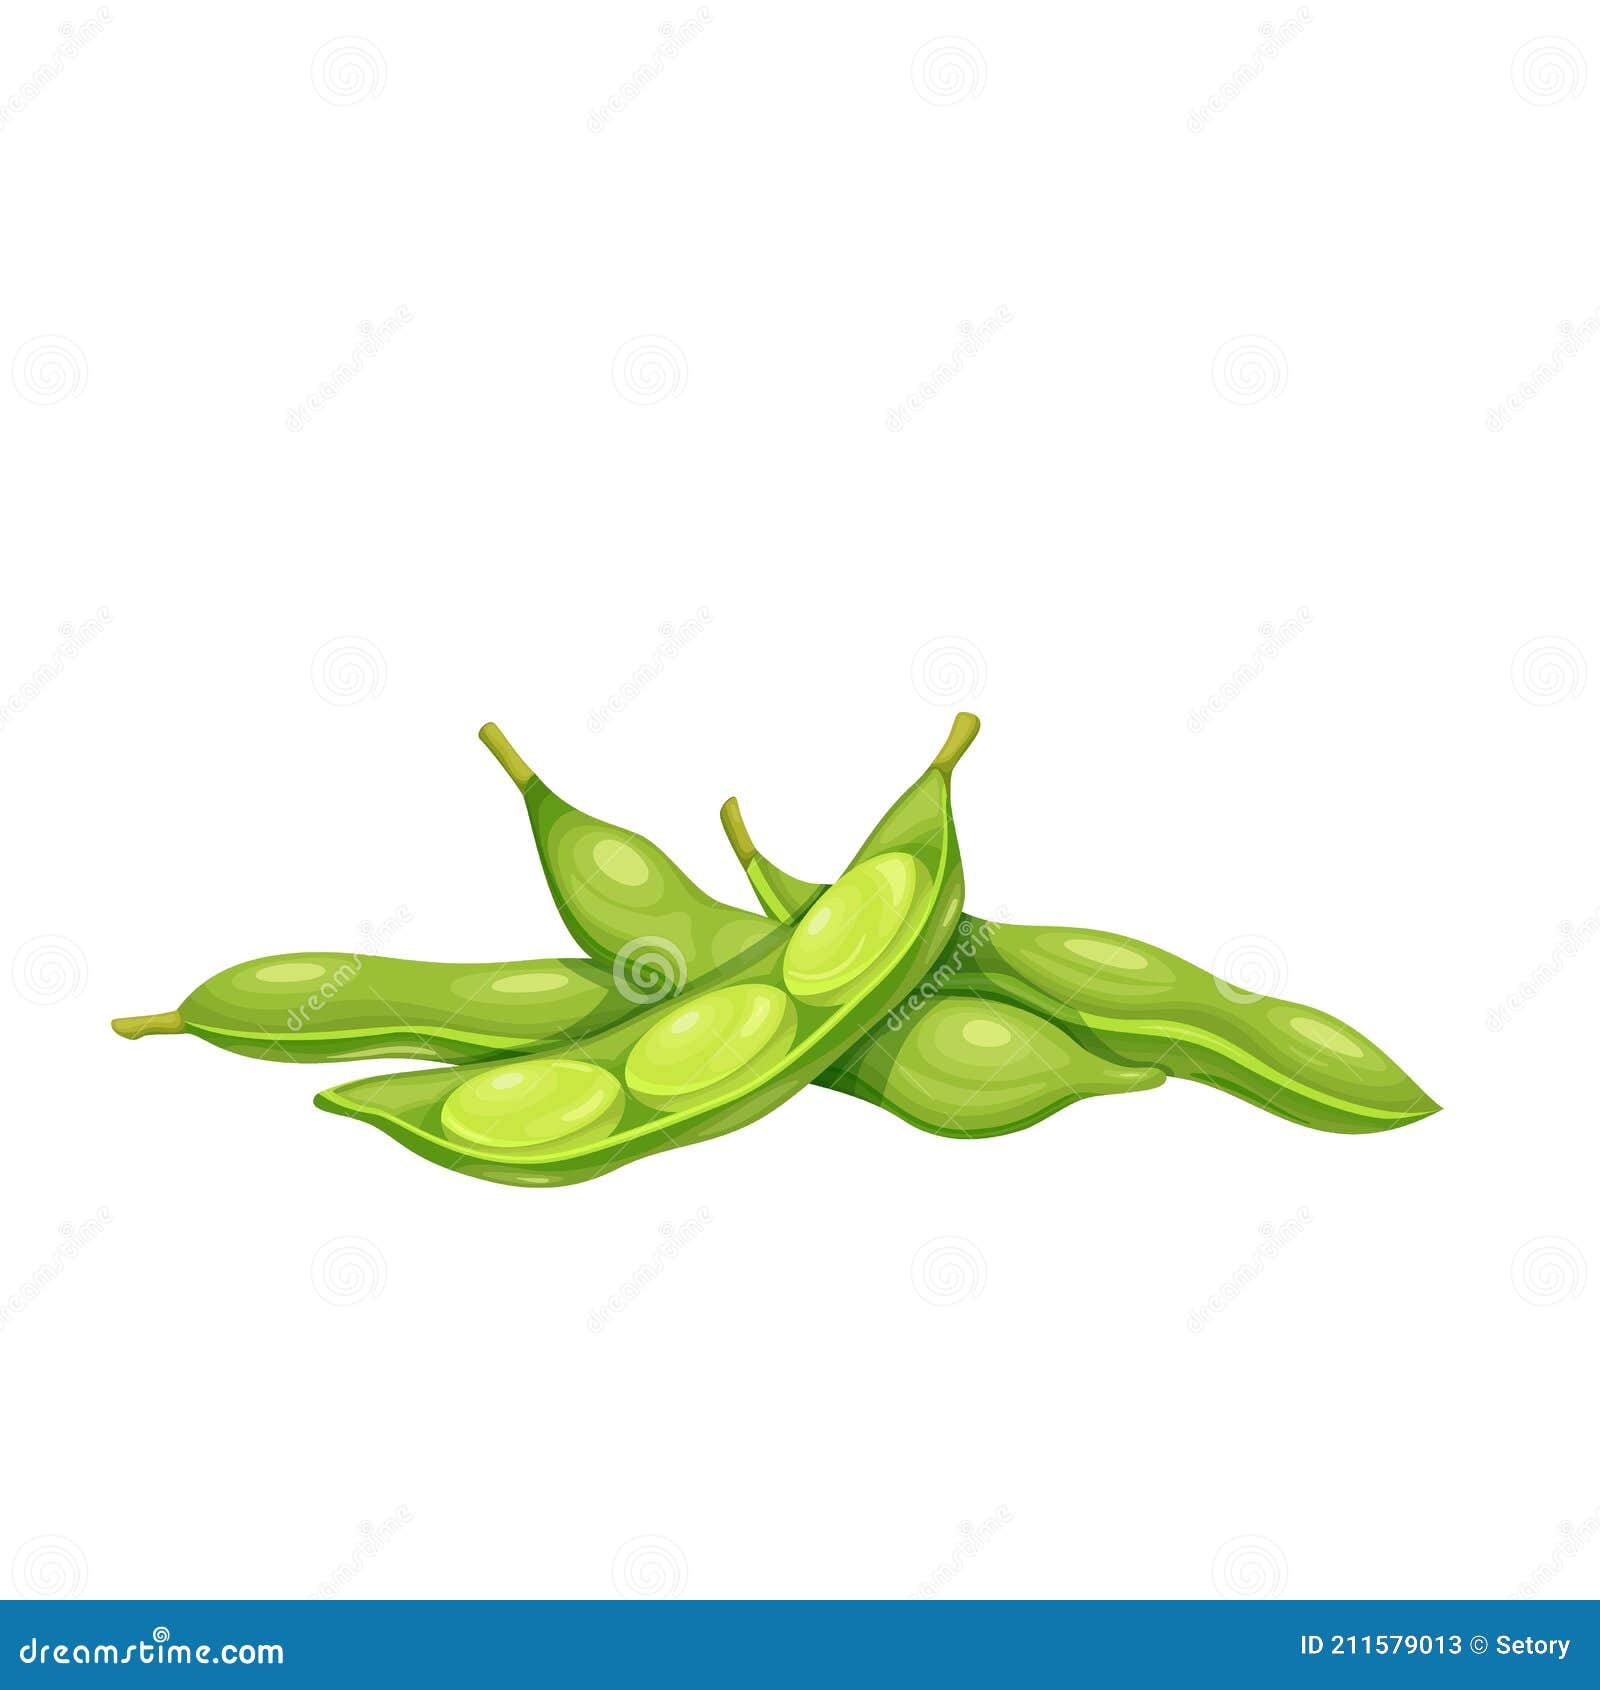 Edamame Beans And Pods Isolated On White Background. Cartoon Vector ...